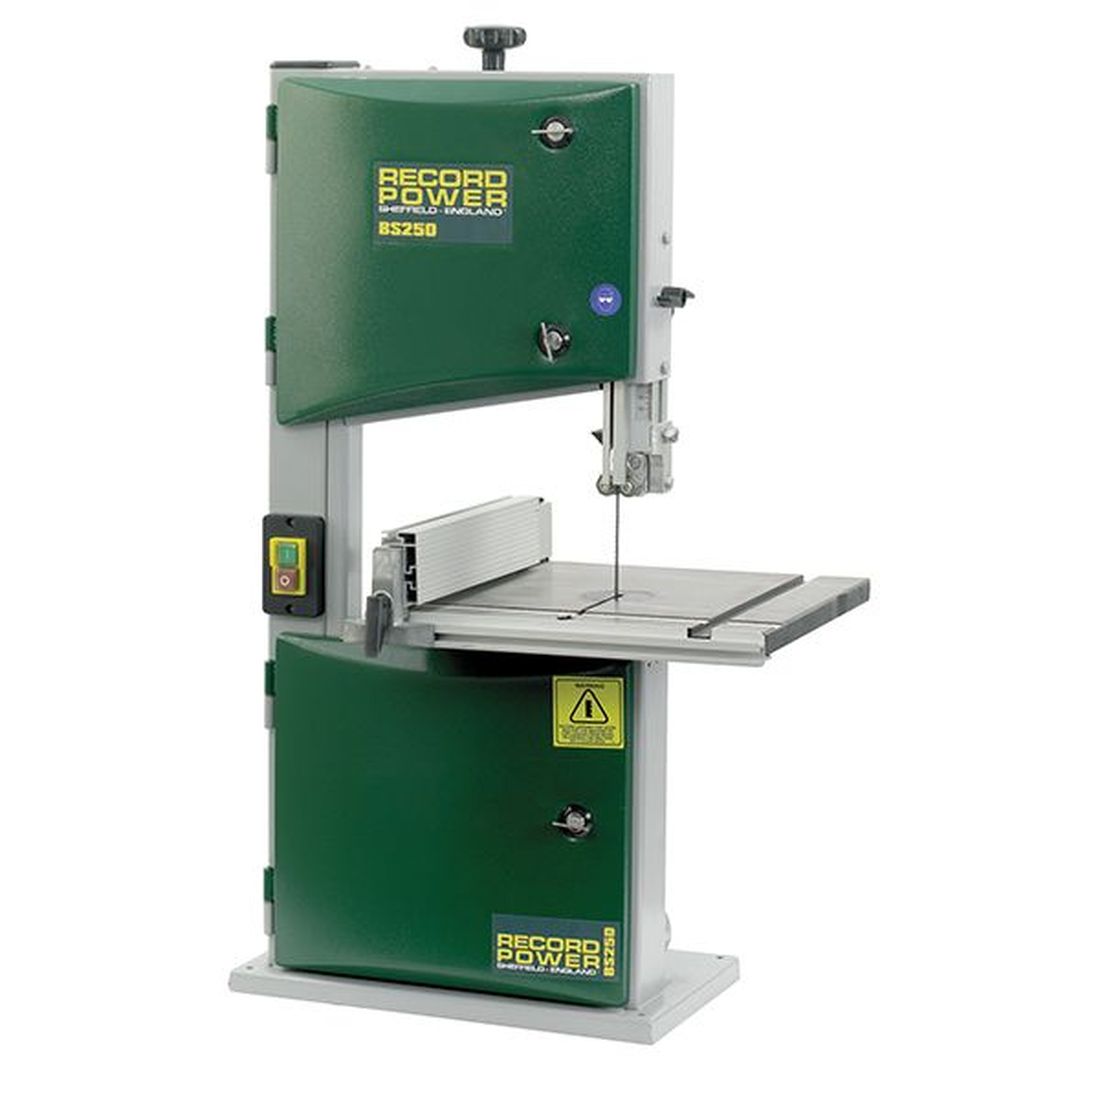 Record Power BS250 Benchtop Bandsaw 350W 240V  